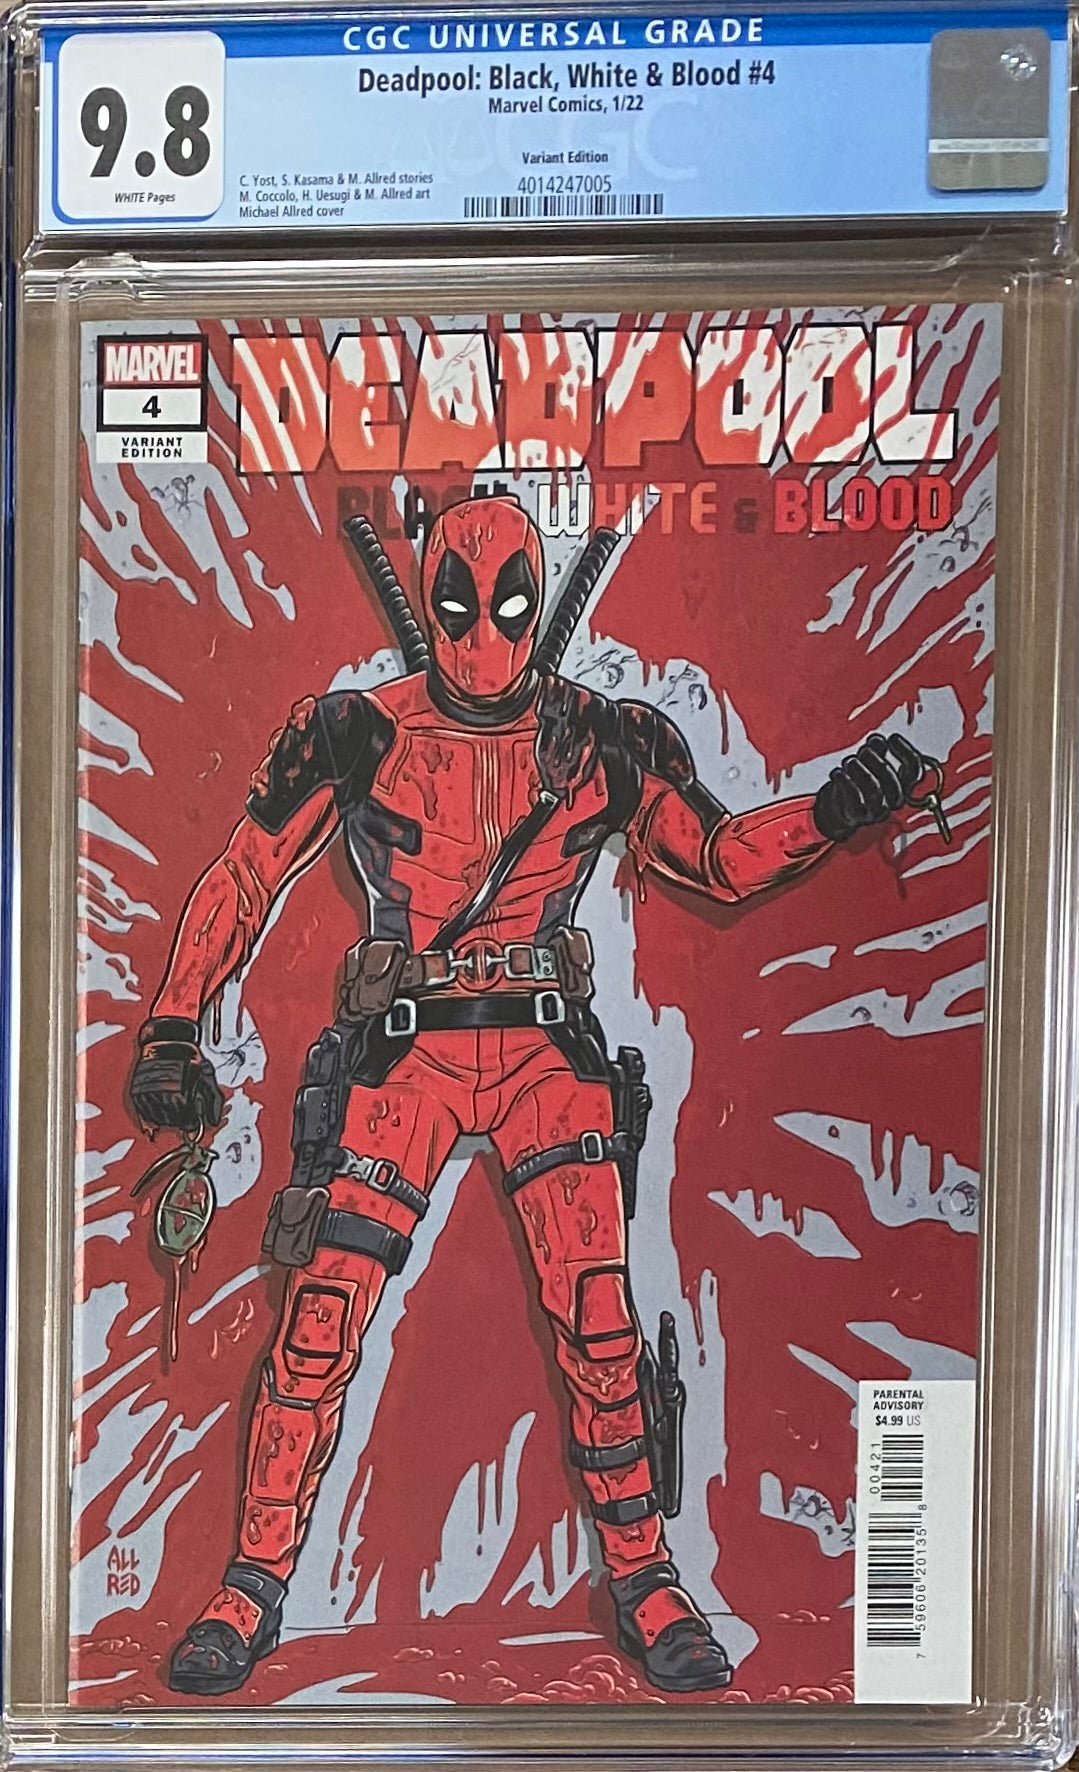 Deadpool: Black, White, and Blood #4 Variant CGC 9.8